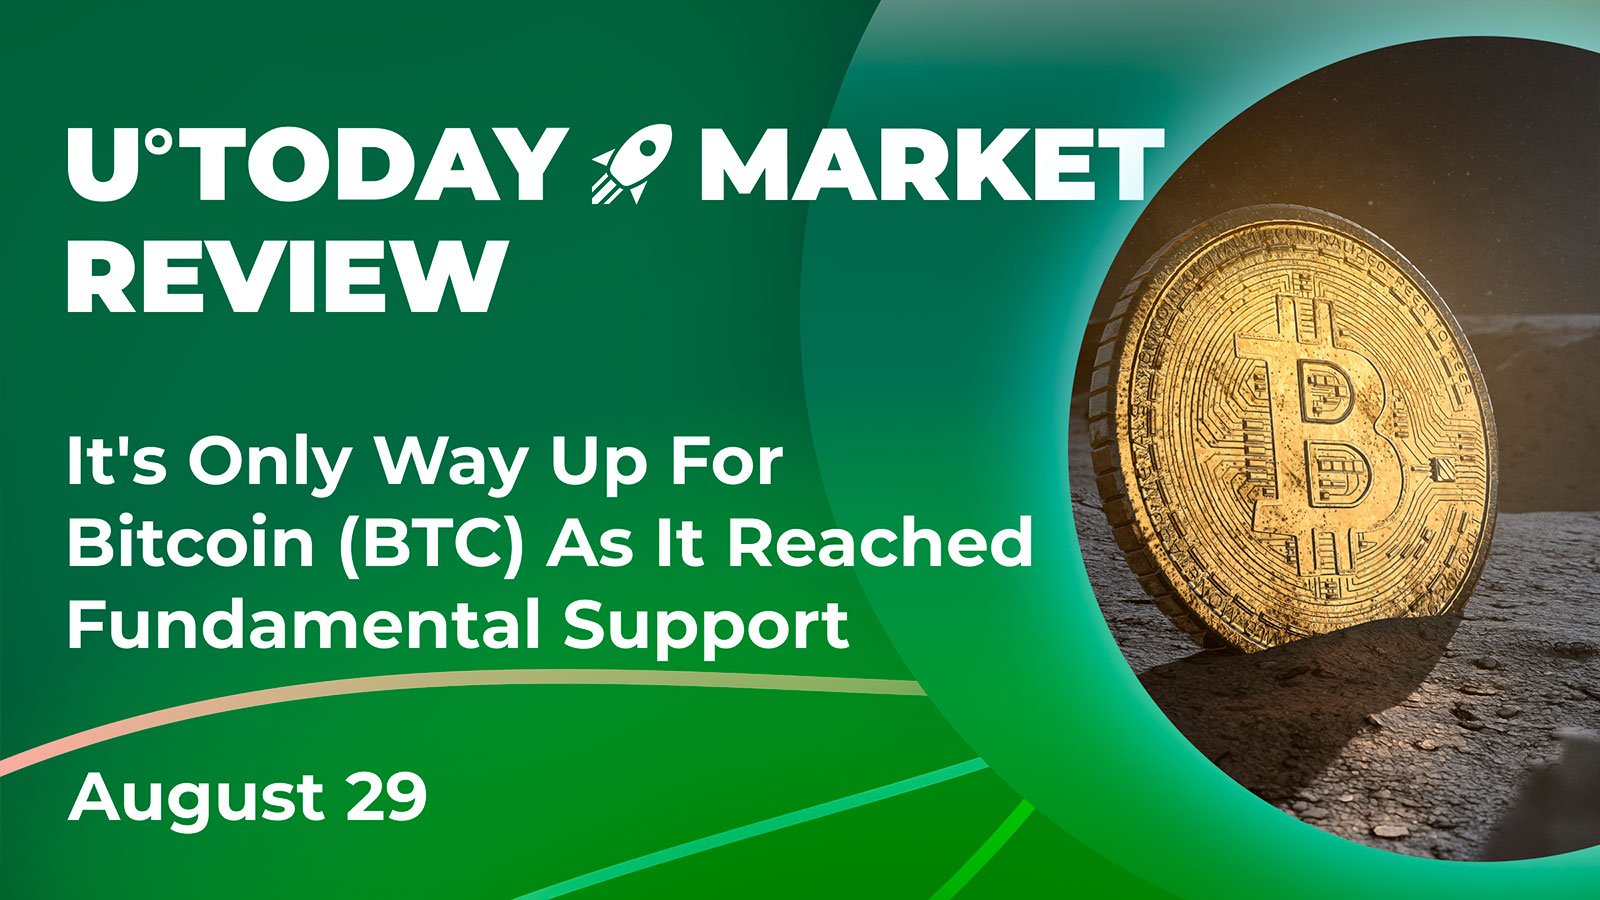 It's Only up for Bitcoin (BTC) as It Reached Fundamental Support: Crypto Market Review, August 29